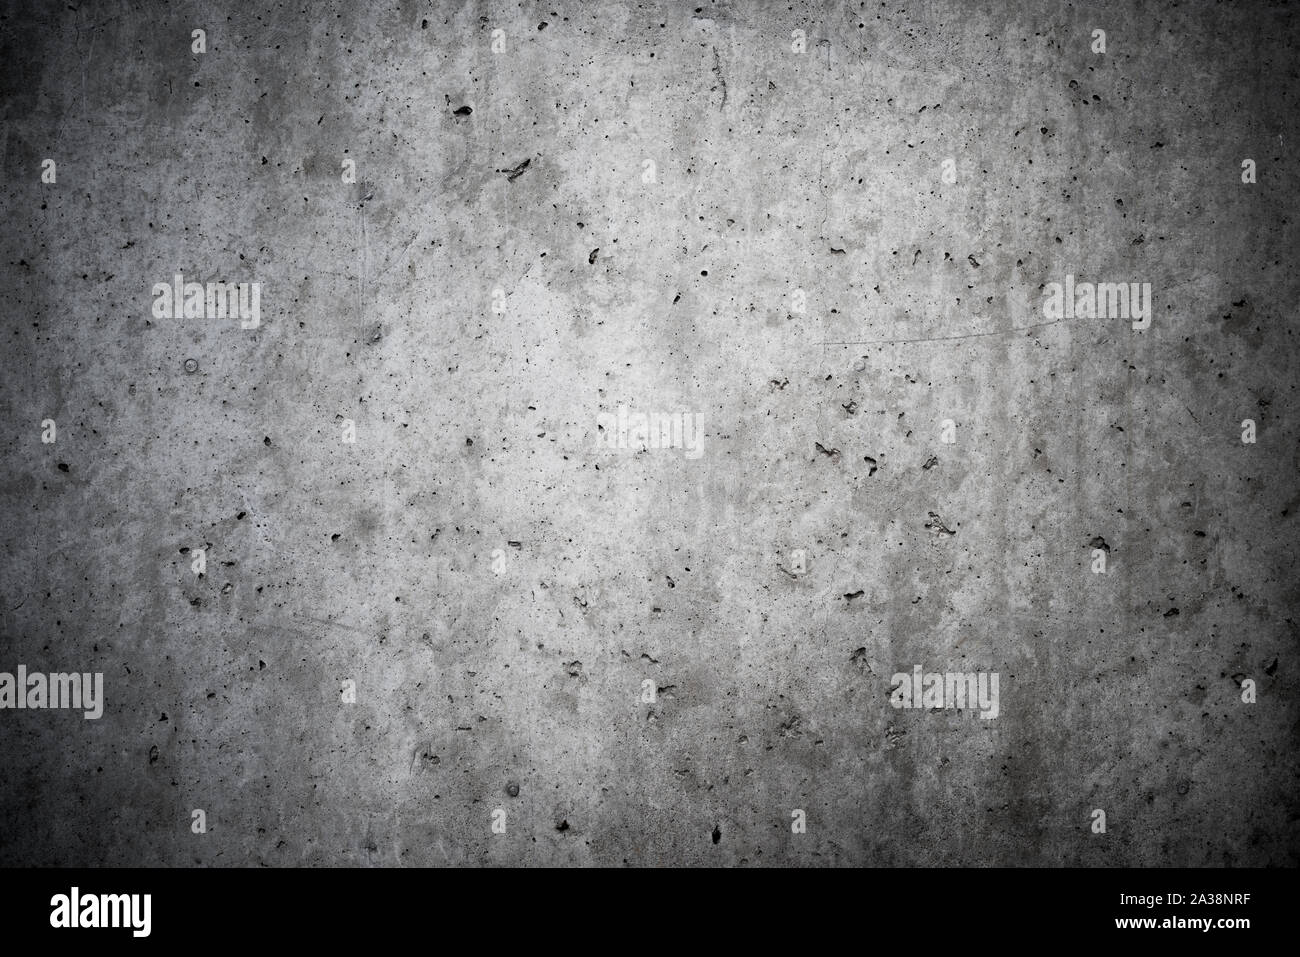 Texture of old, grungy, gray and white concrete or cement wall for background Stock Photo